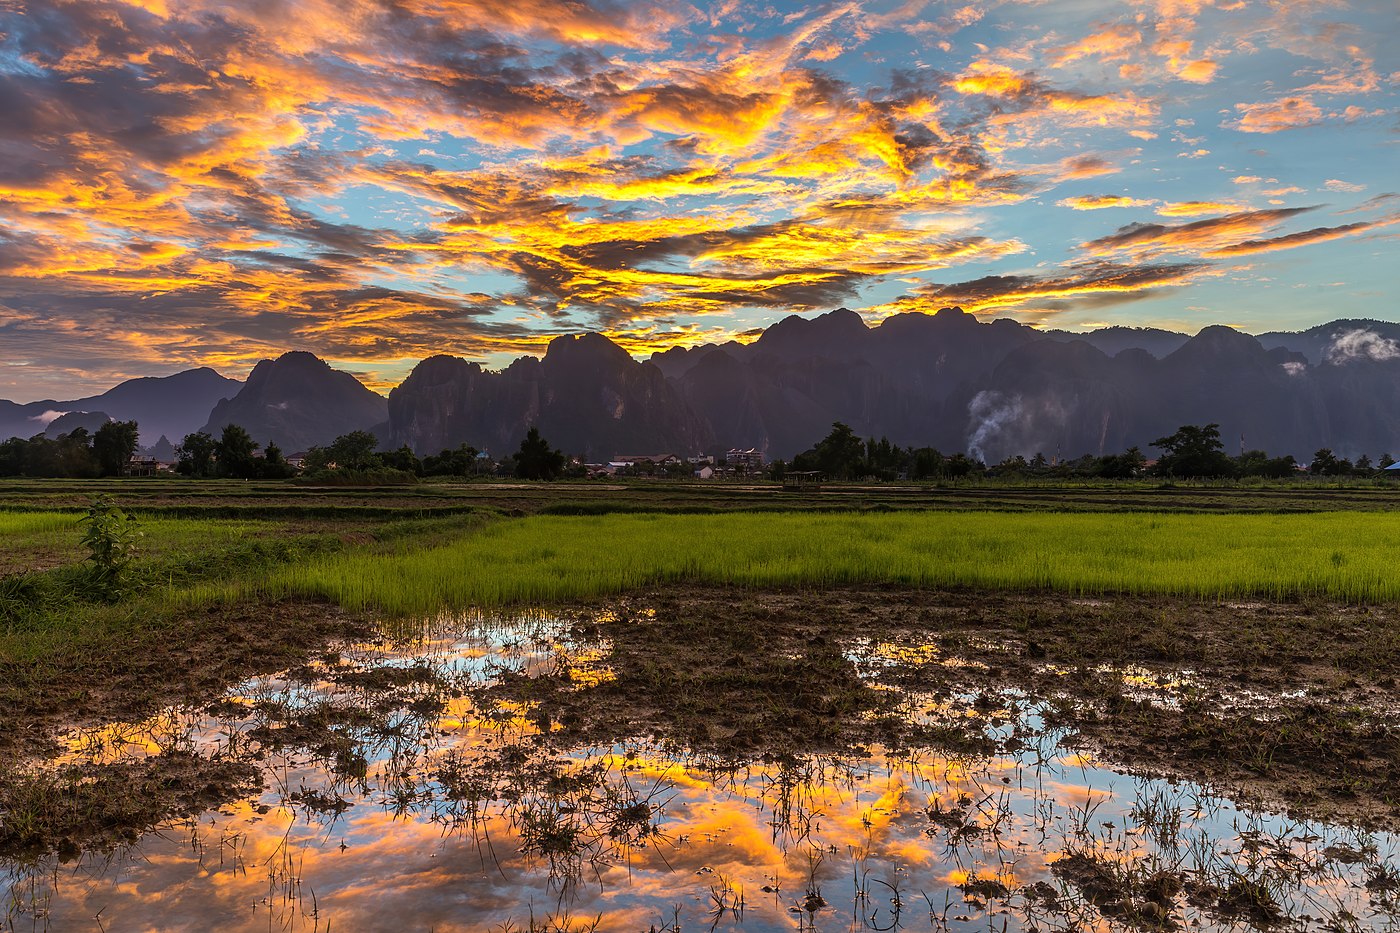 Colorful sky with luminous orange and gray clouds reflecting in the water of a paddy field, at sunset